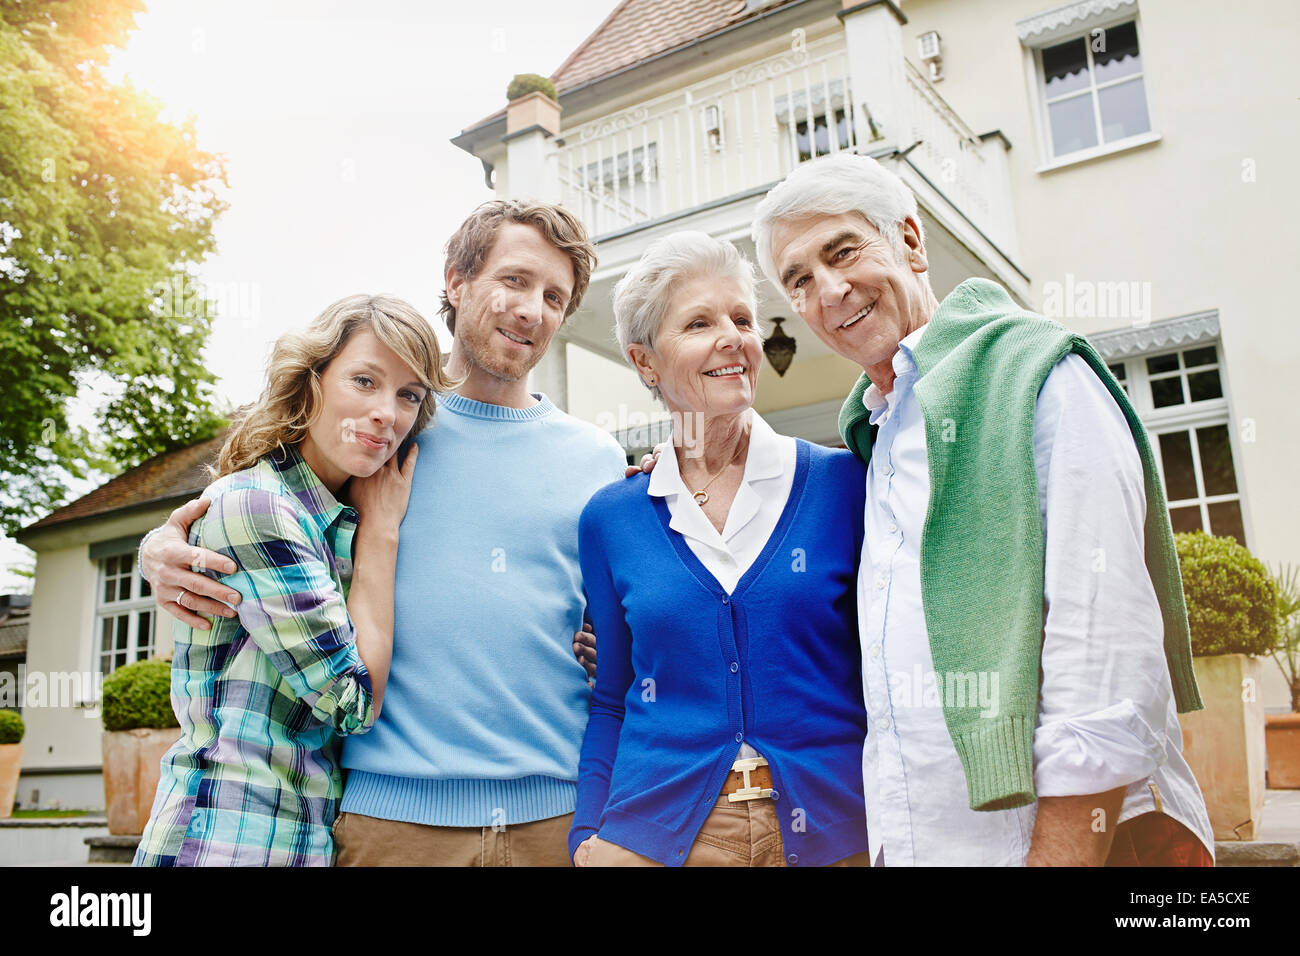 Germany, Hesse, Frankfurt, Senior couple with married children in front of villa Stock Photo